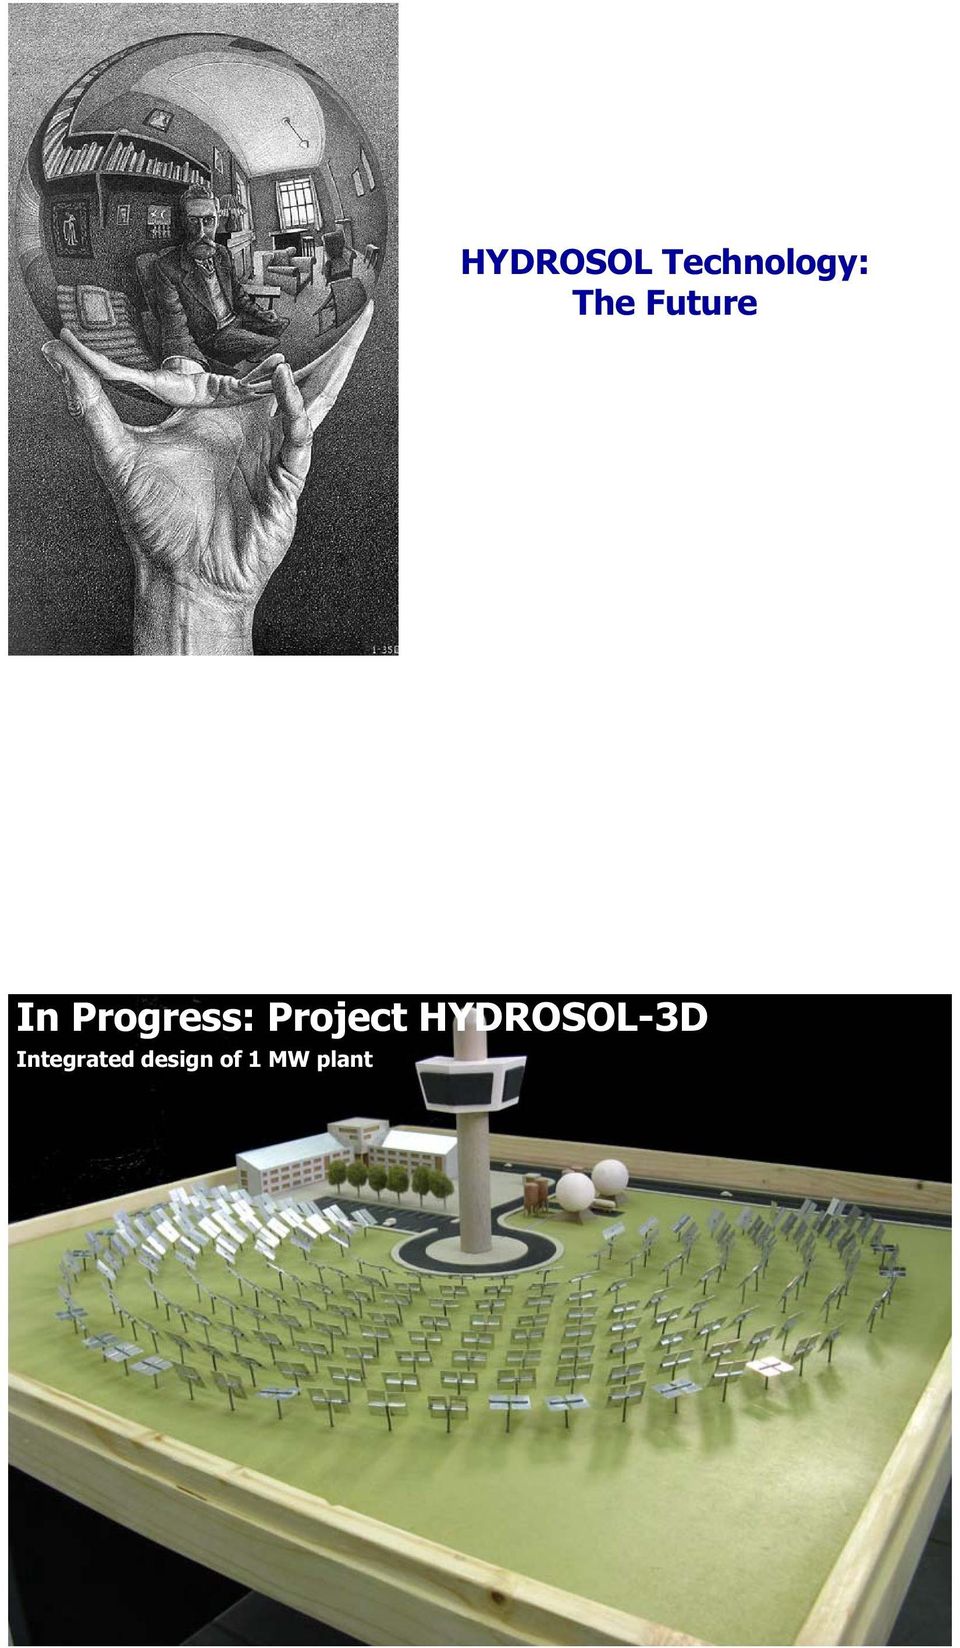 Project HYDROSOL-3D